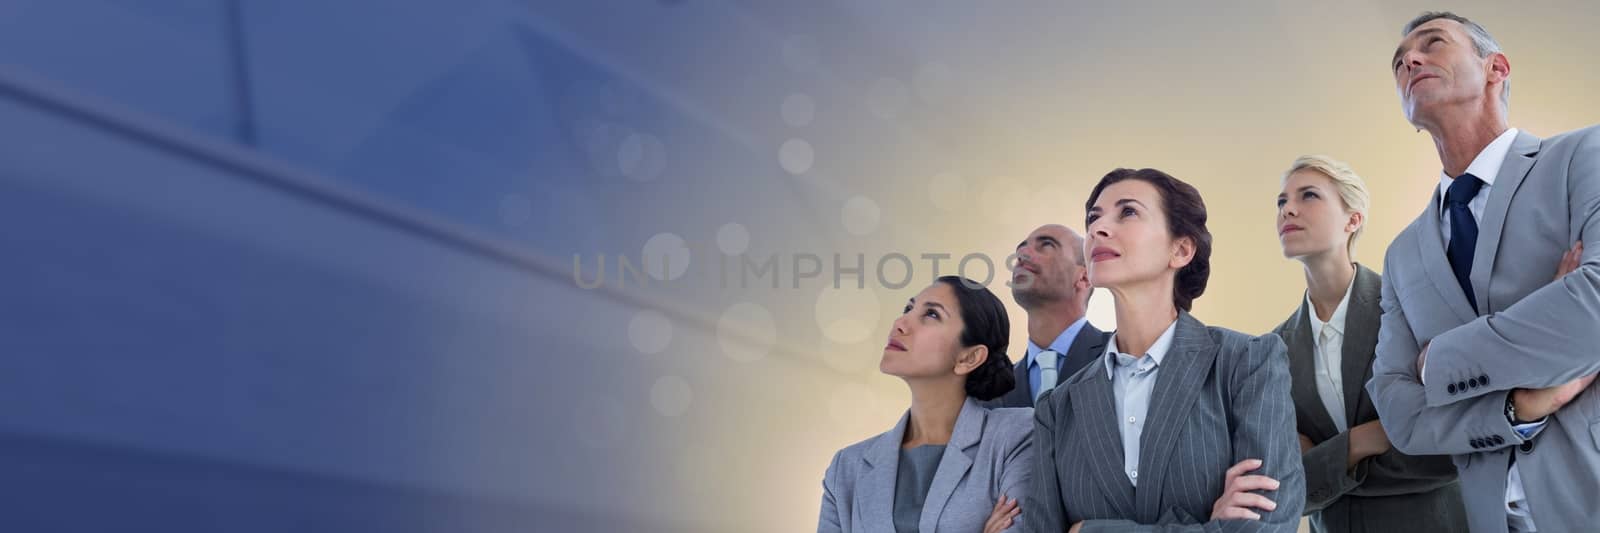 Digital composite of Business people and building with flare light source